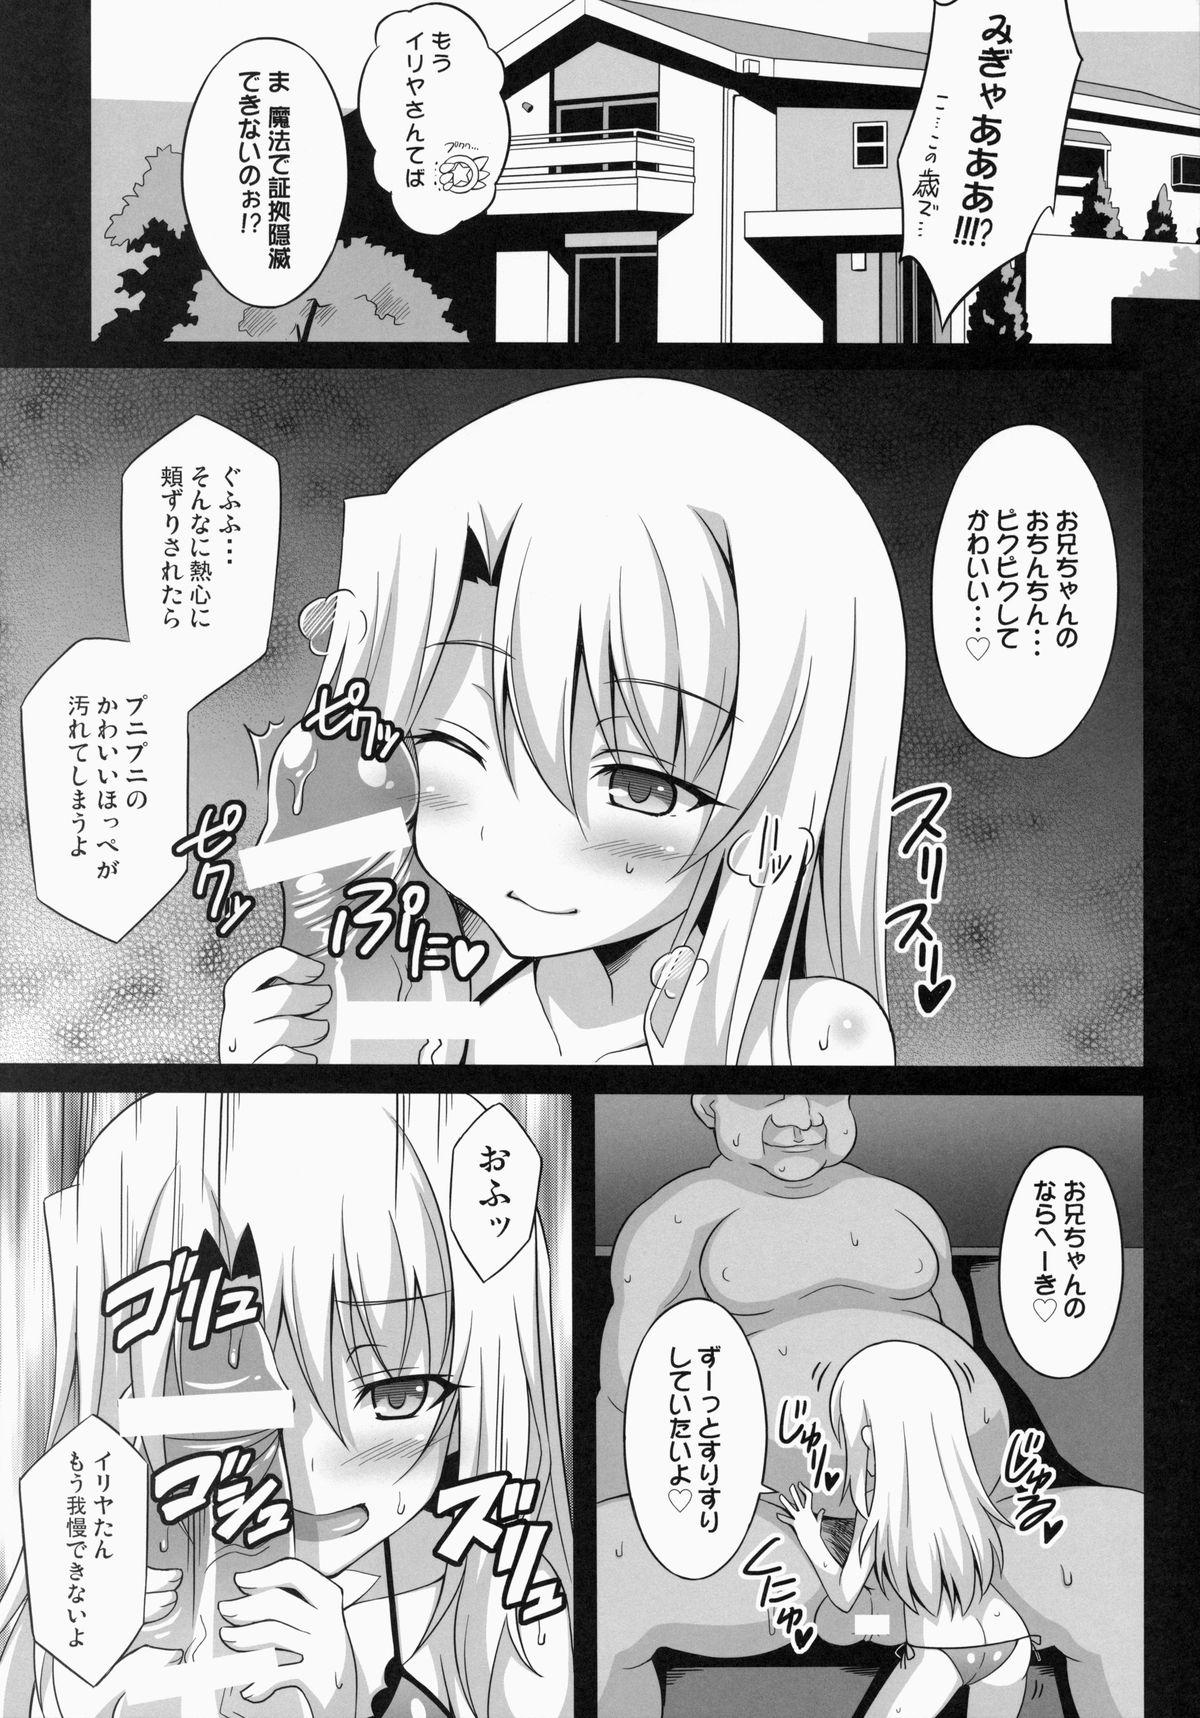 Woman Datenshi XX EPISODE 1 - Fate kaleid liner prisma illya Ejaculations - Page 6